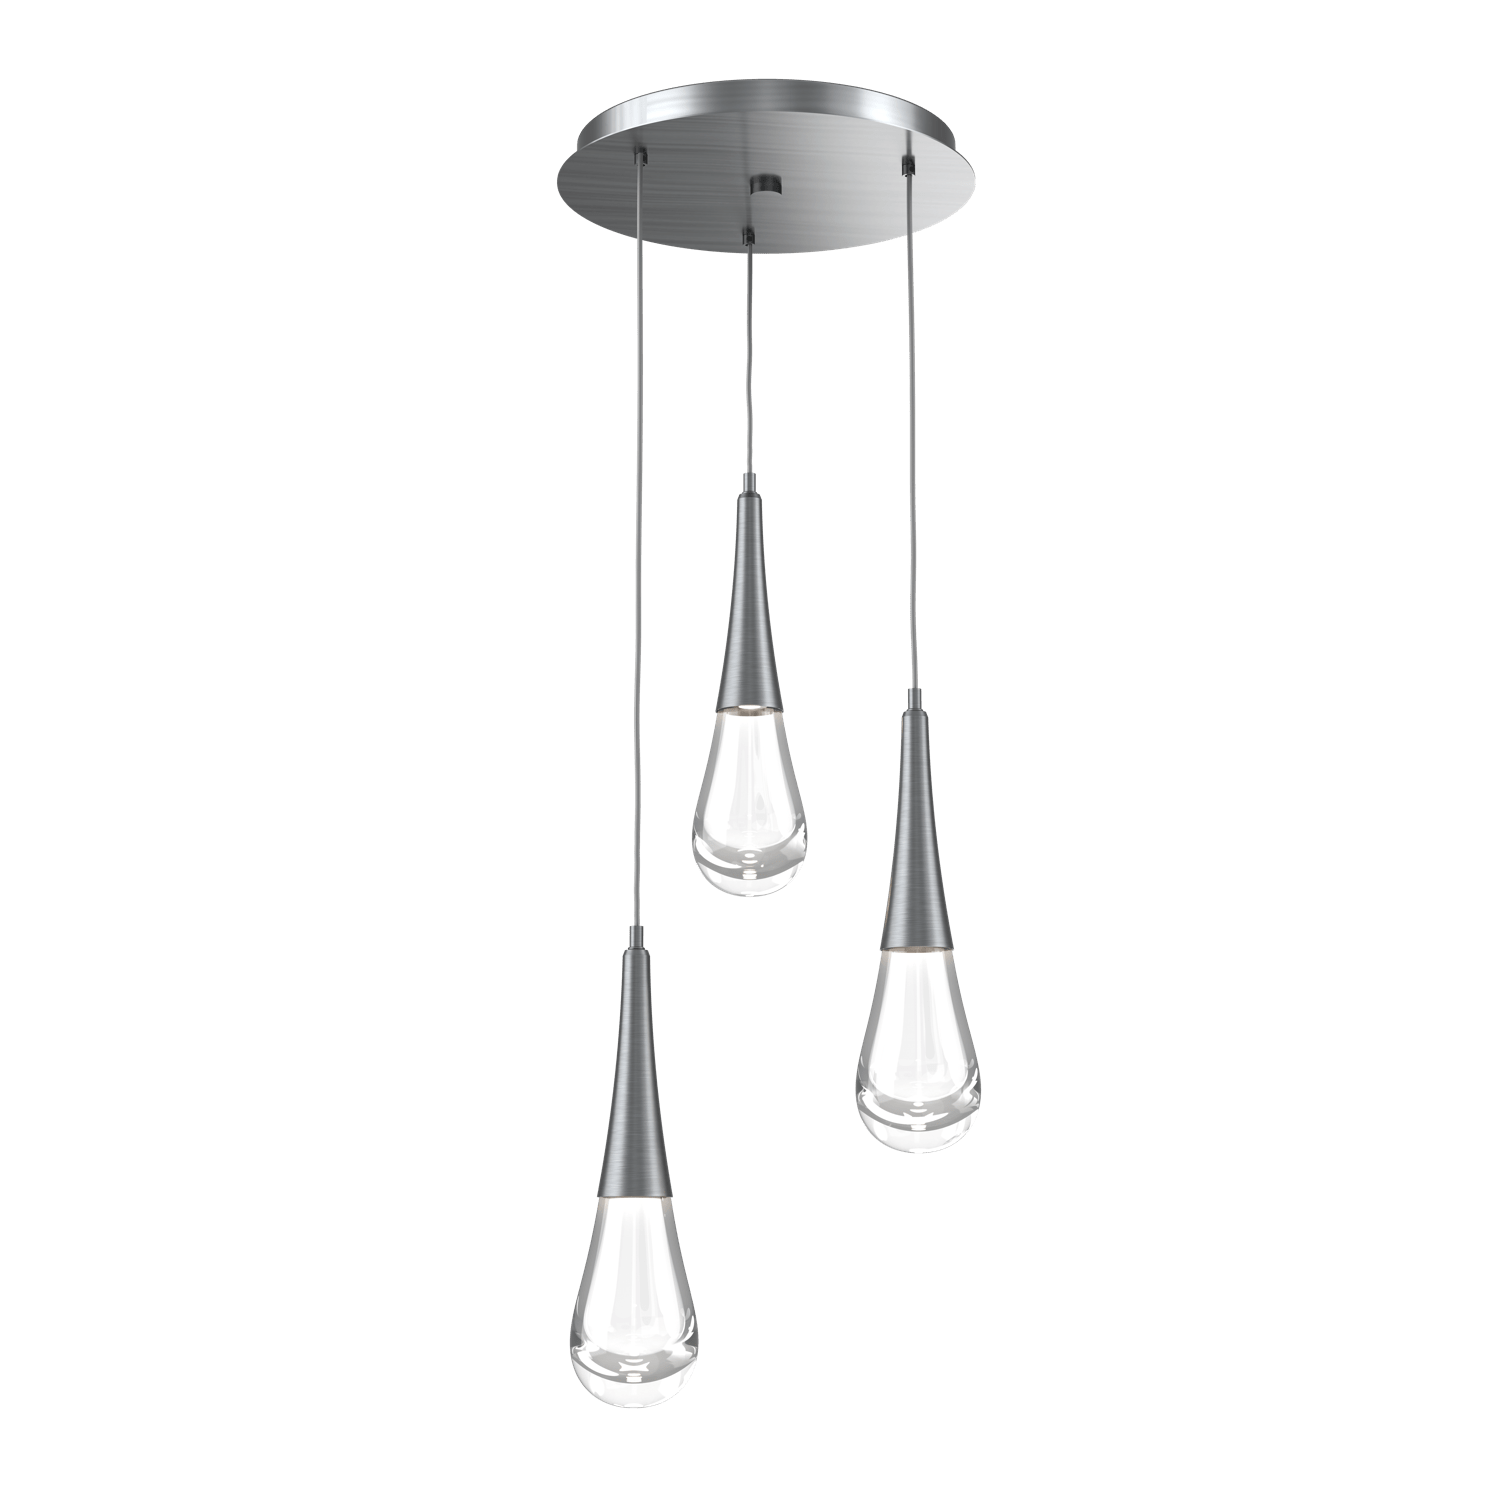 CHB0078-03-GM-Hammerton-Studio-Raindrop-3-light-round-pendant-chandelier-with-gunmetal-finish-and-clear-blown-glass-shades-and-LED-lamping